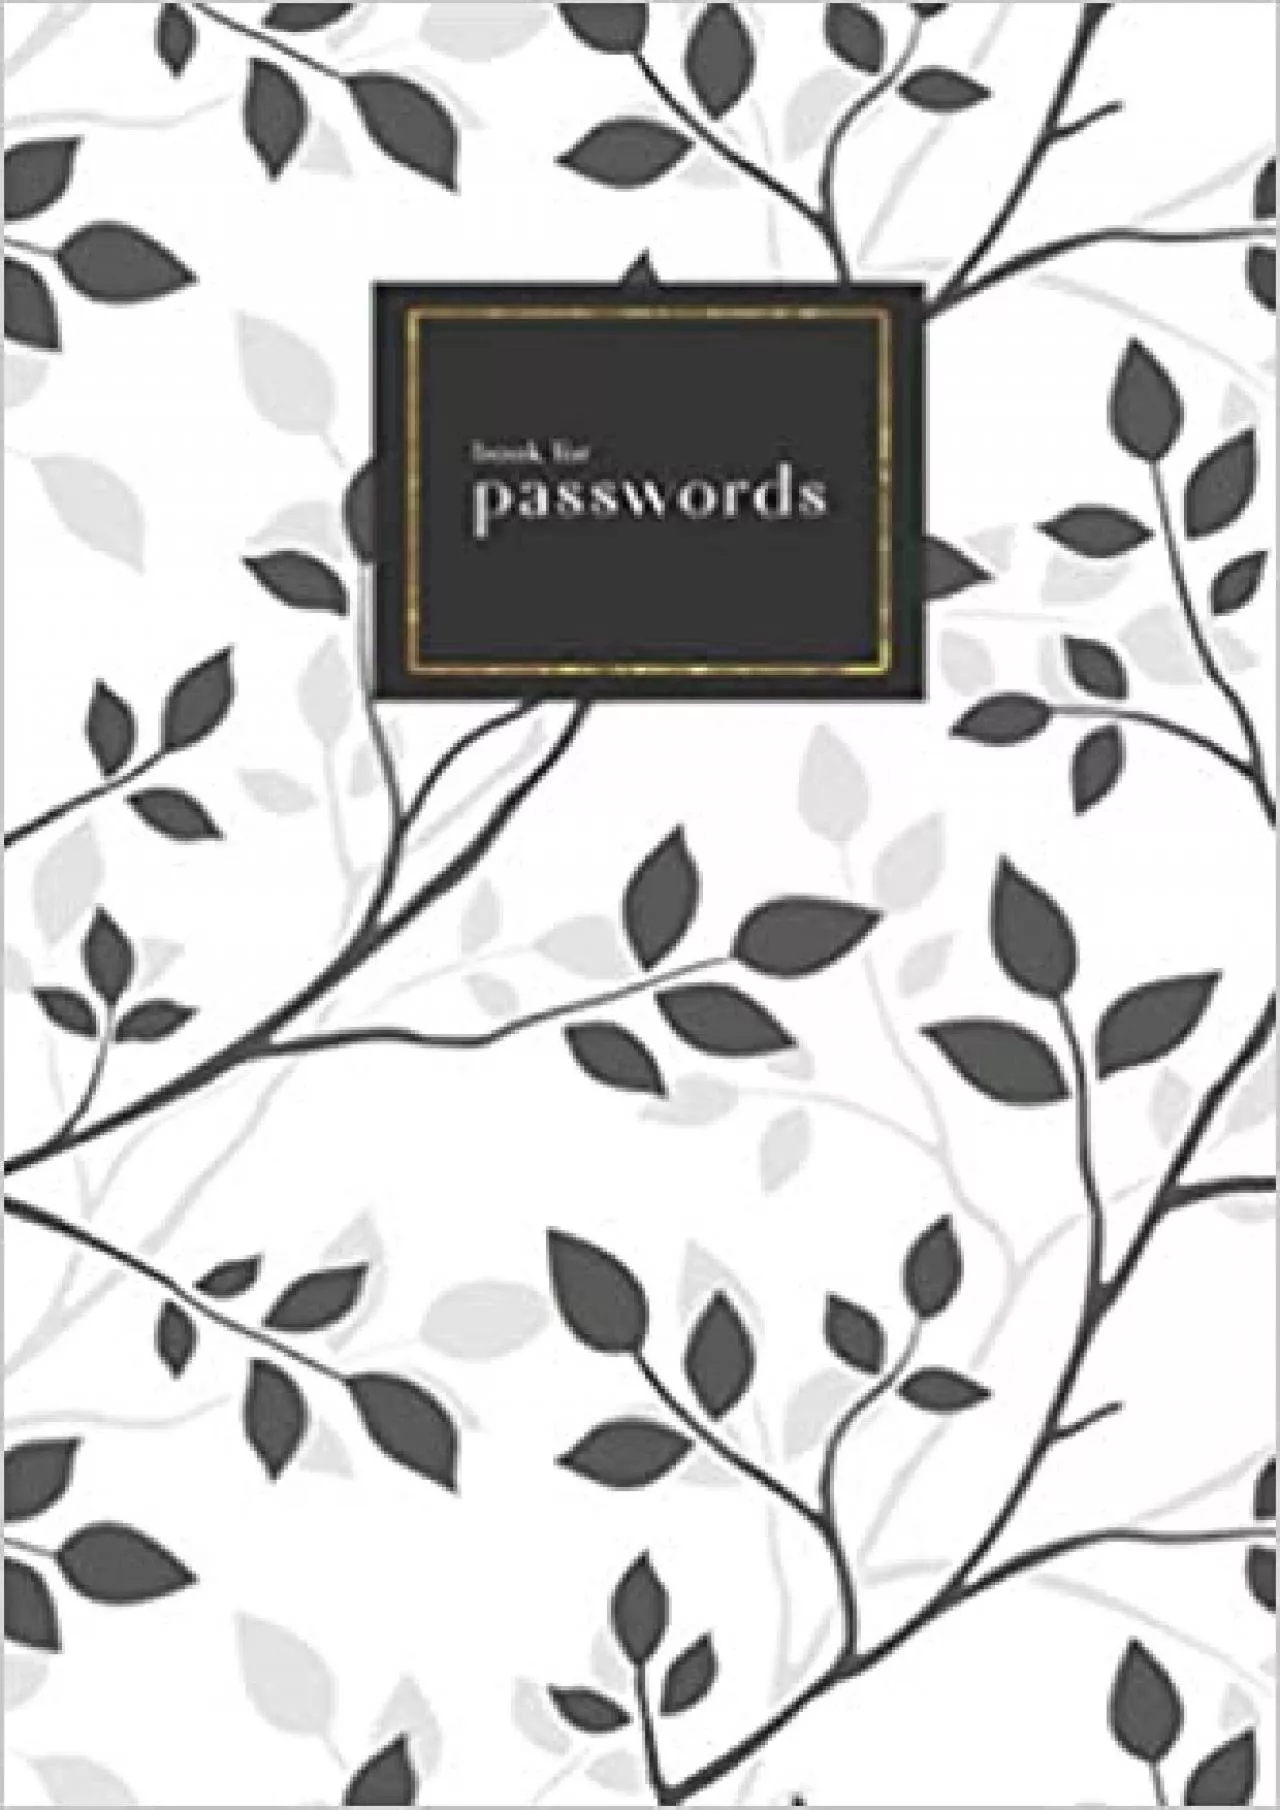 (EBOOK)-Book for Passwords 4x6 Small Internet Address Notebook with A-Z Alphabetical Index